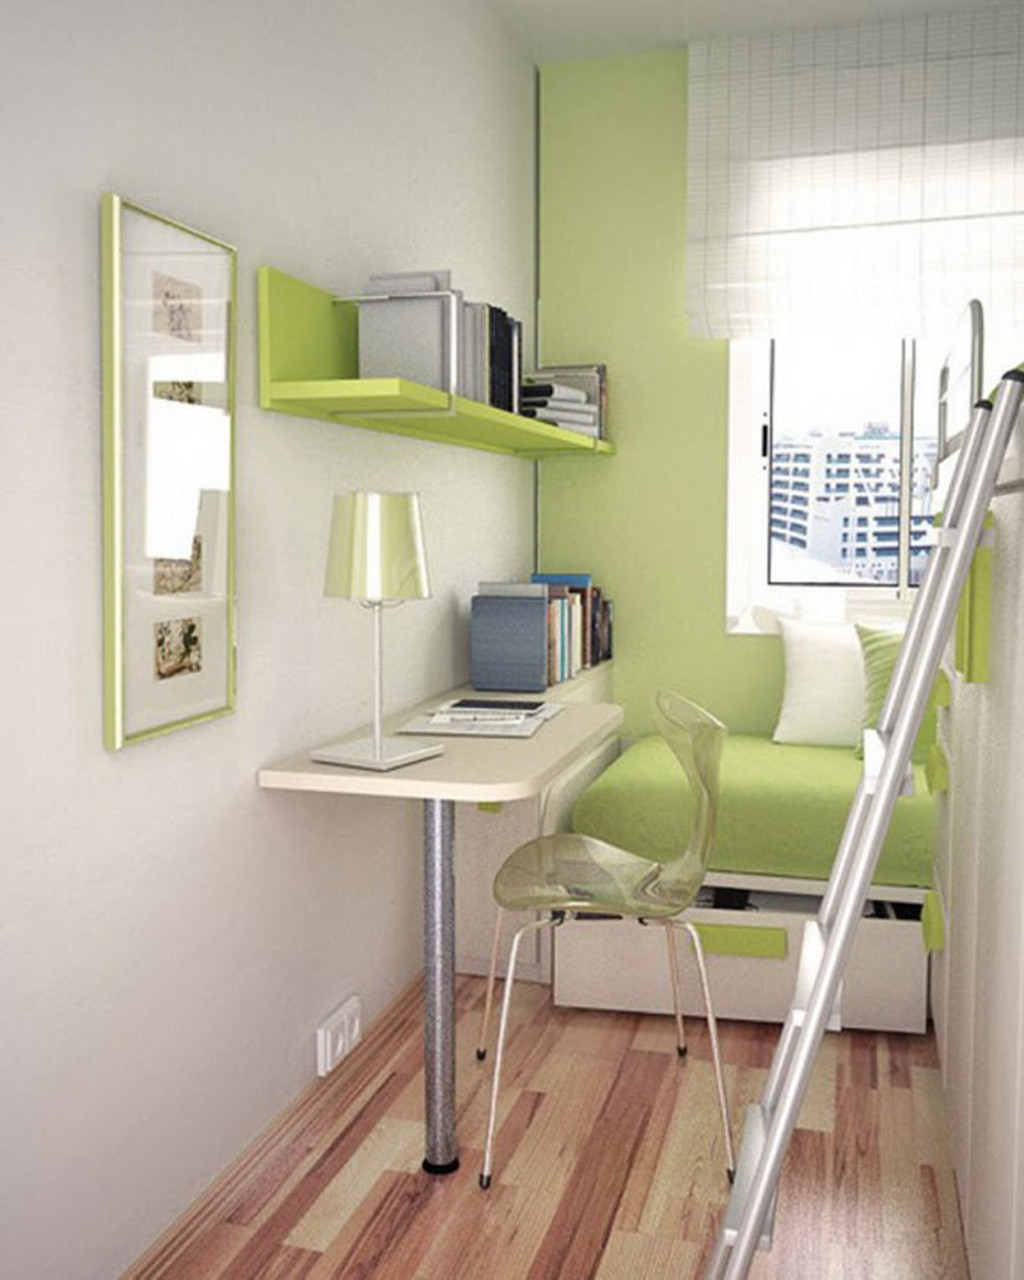 Small Space Bedroom
 Small Space Design Ideas for Your Teen’s Room